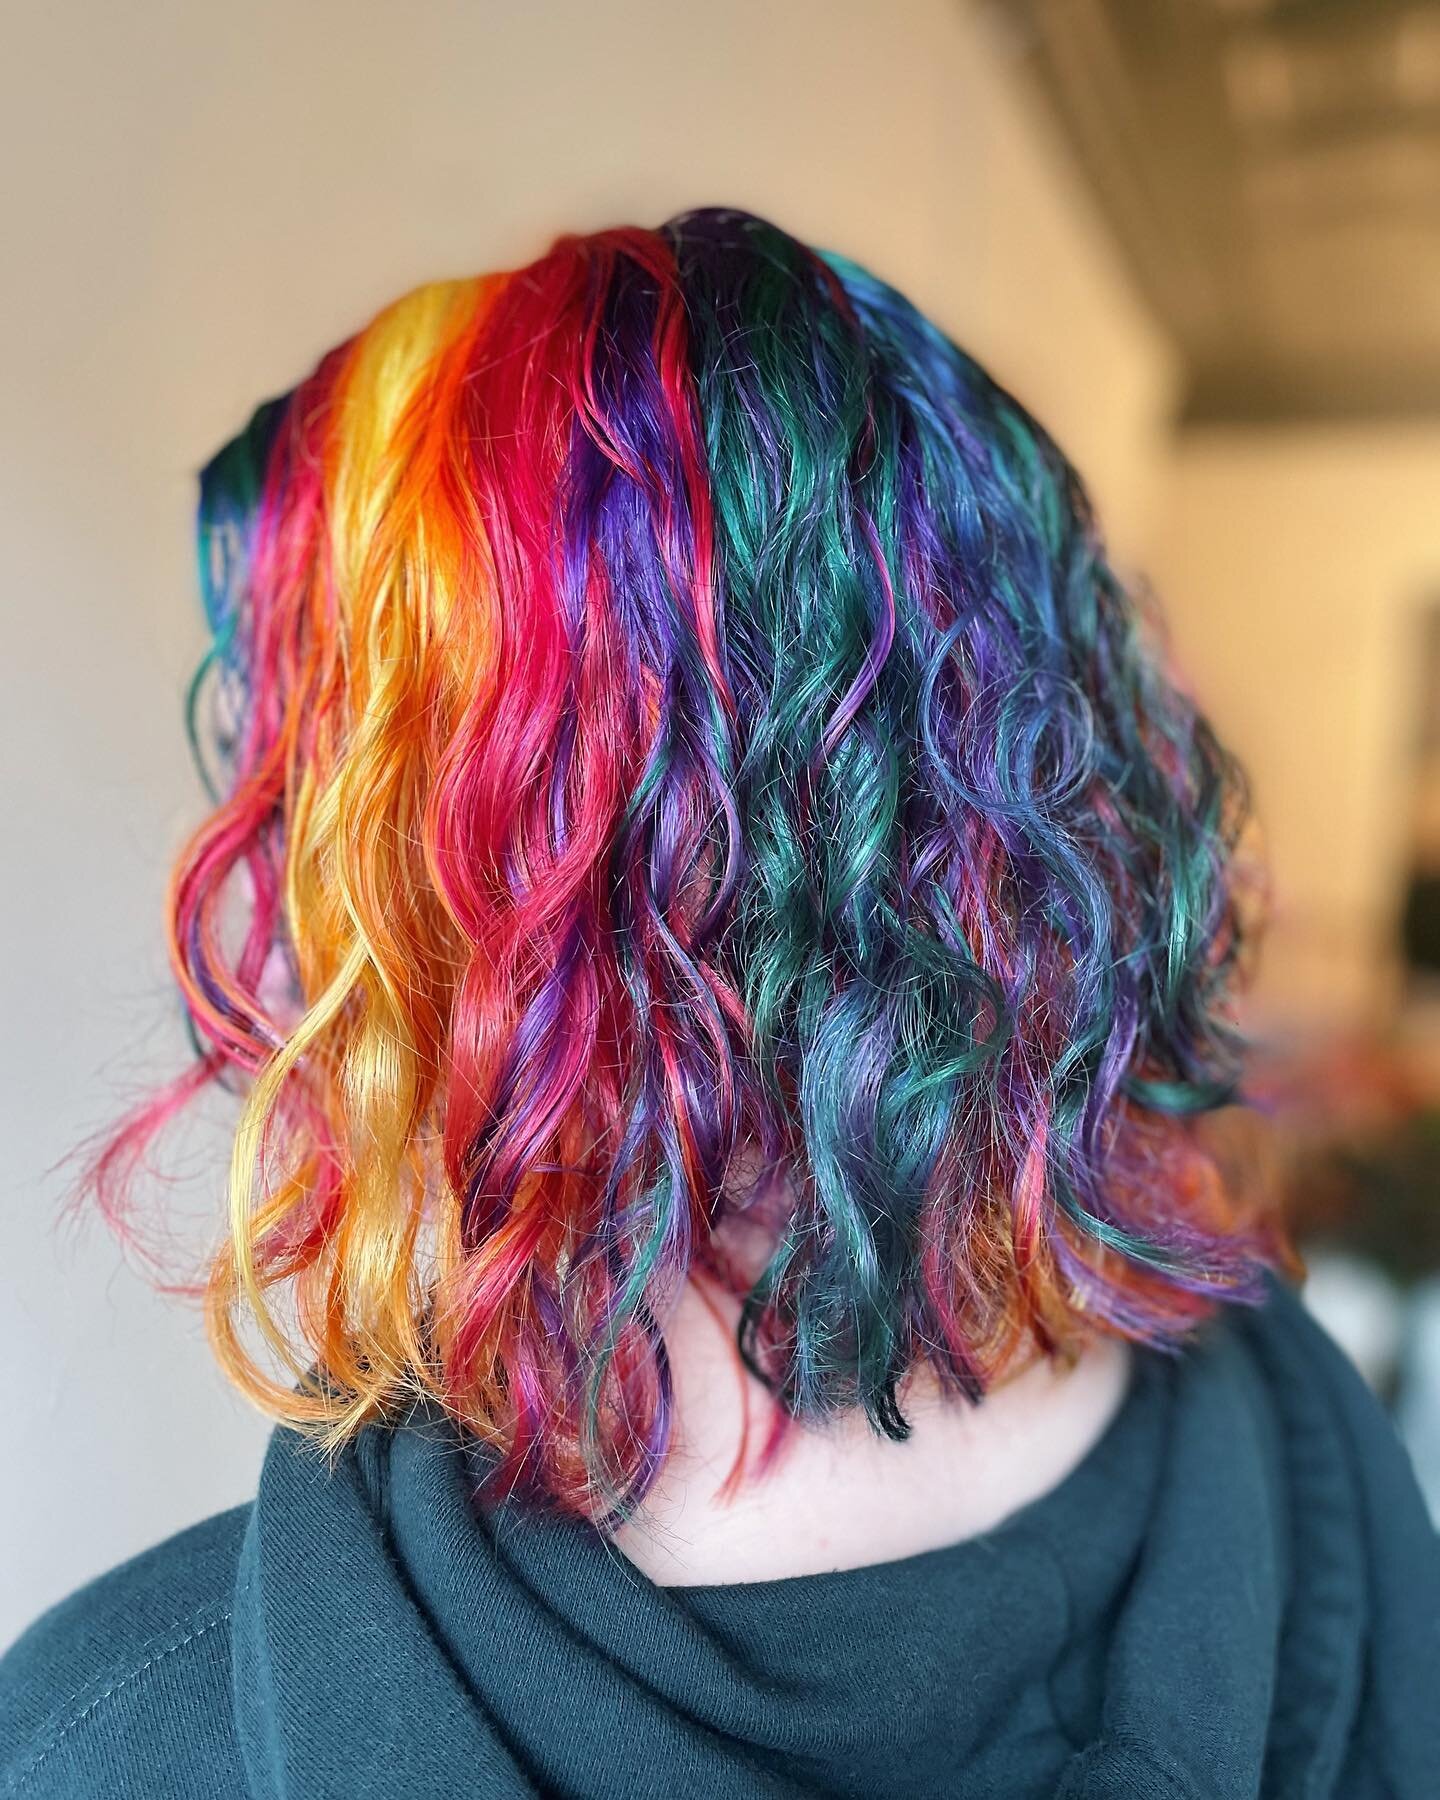 🌈Rainbow and Black Split Dye for Olivia 🌈 Swipe for the full look and the before! 

Fantasy Color by Master Stylist Olivia @olivedoinhair